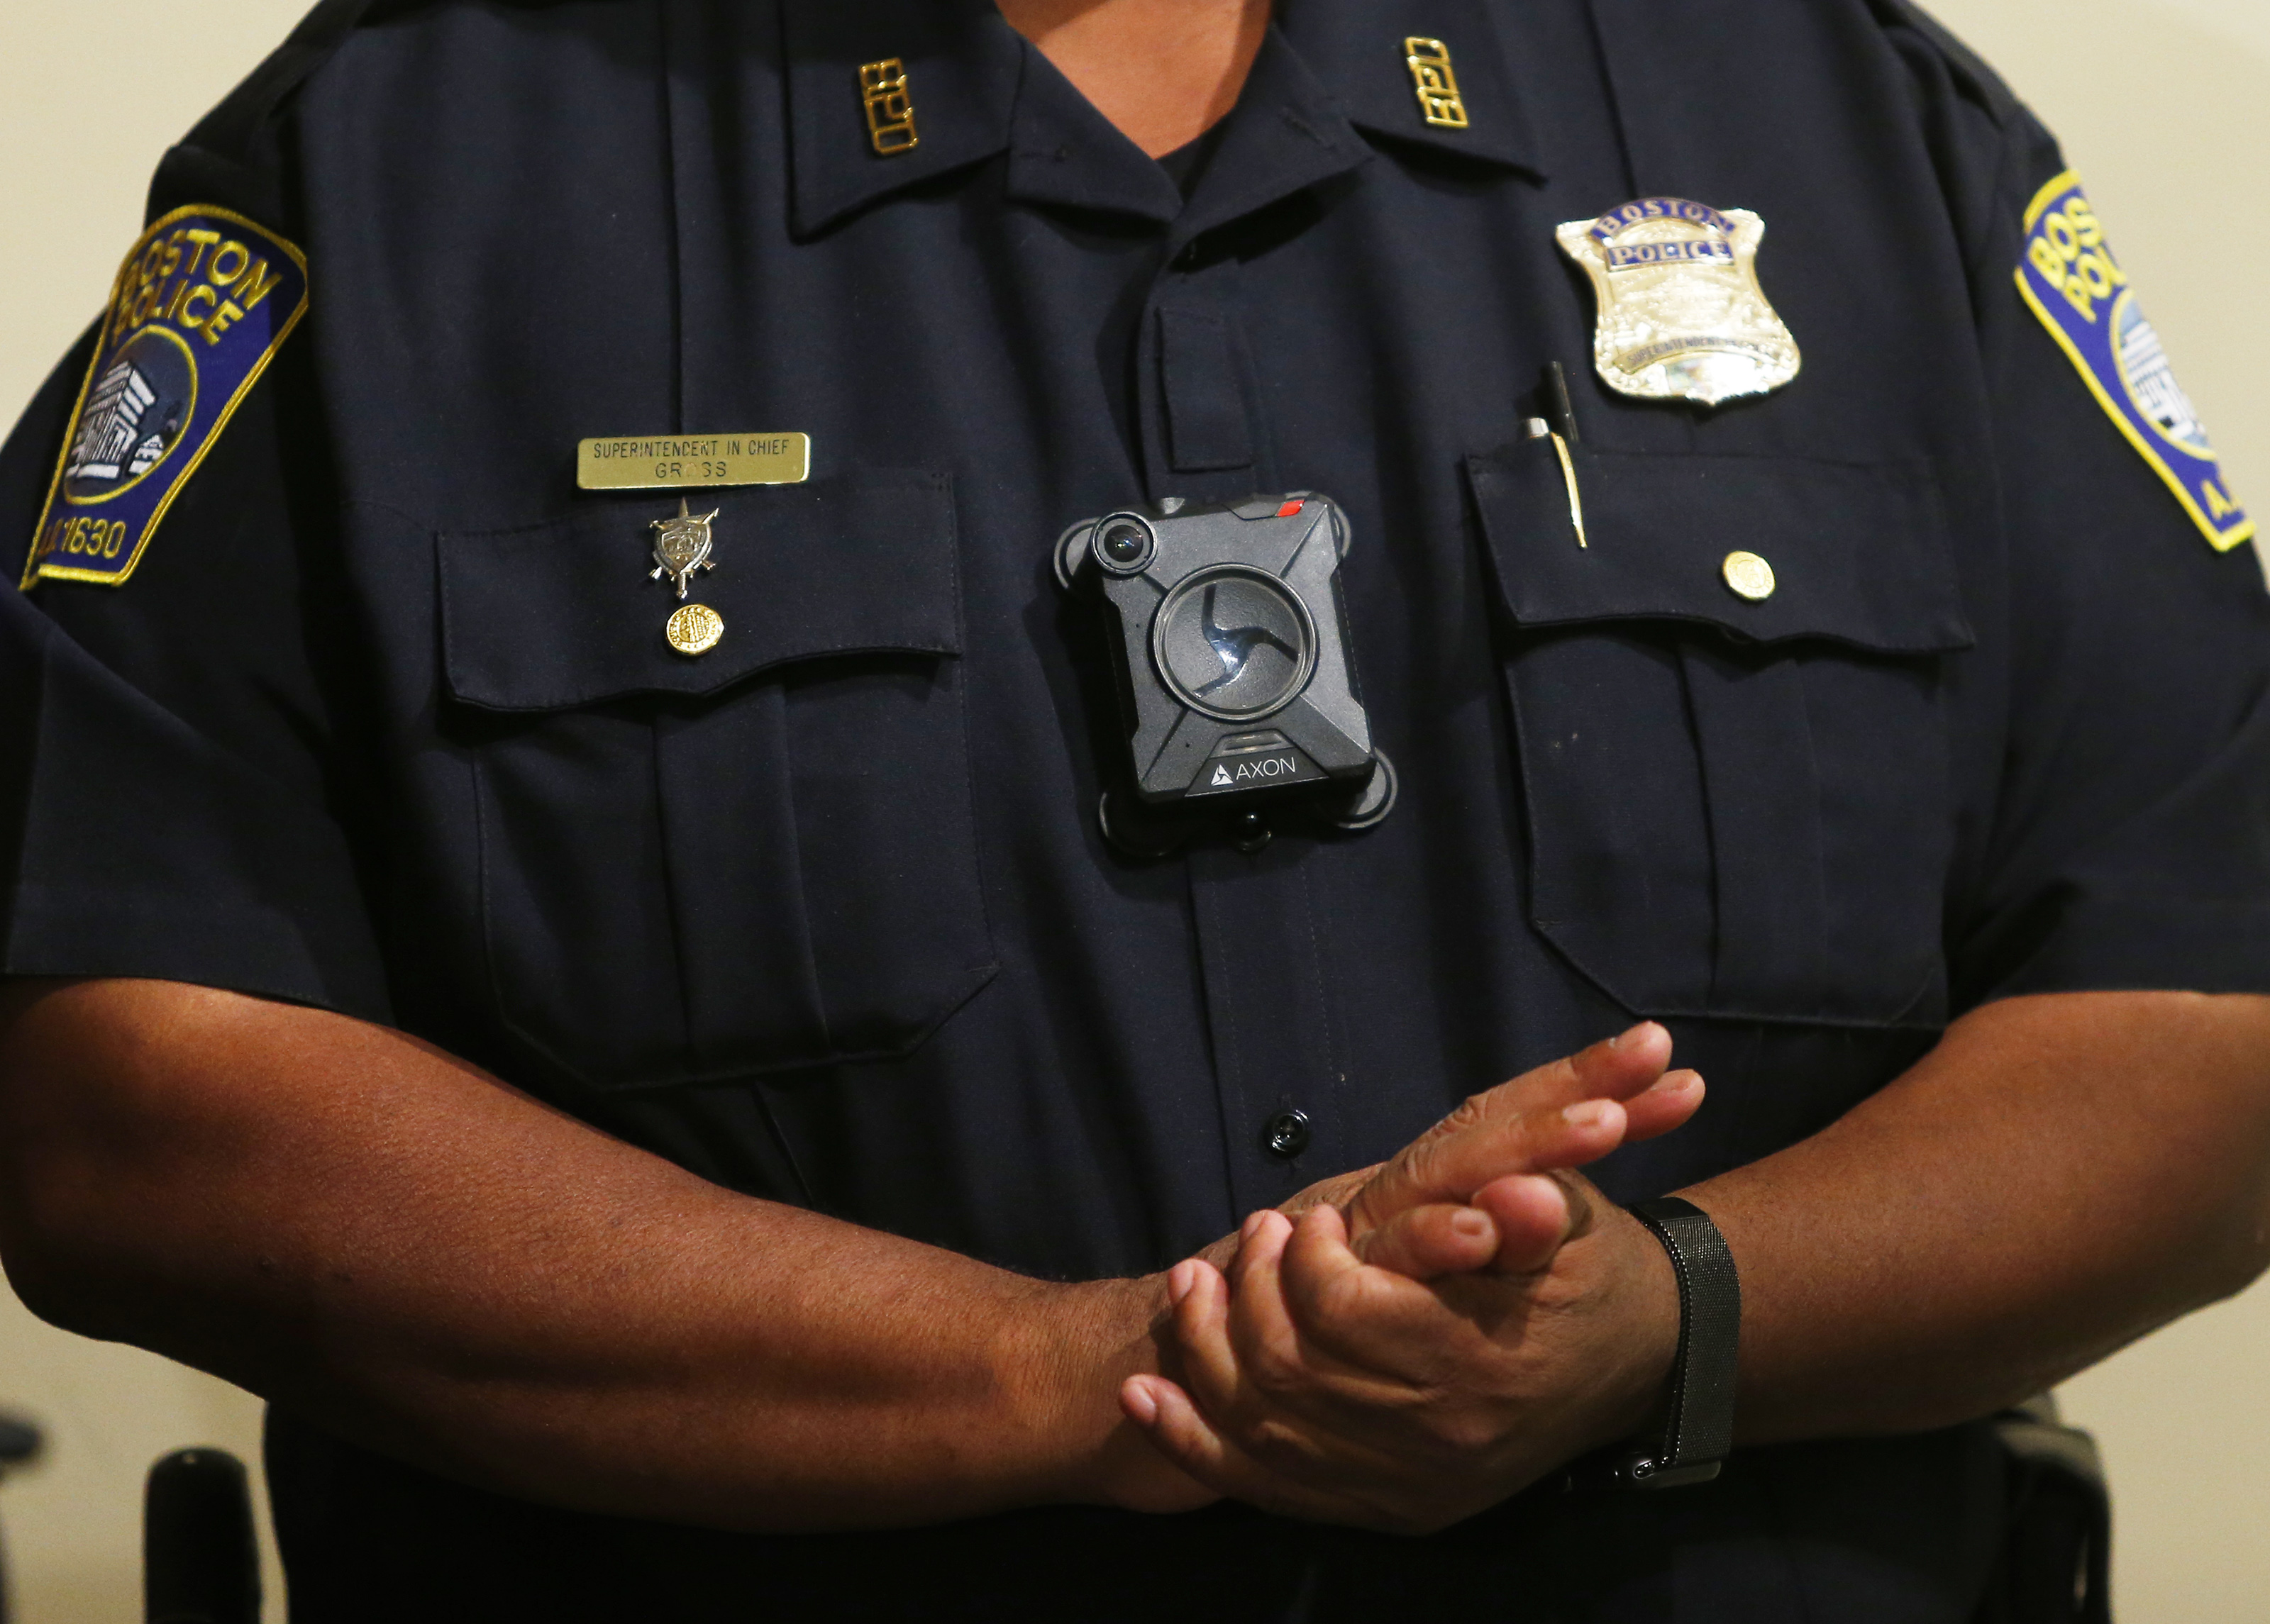 Boston Police Superintendent in Chief William Gross wears a body camera during a press conference at Police Headquarters in Boston on Sept. 20, 2016. (Jessica Rinaldi—Boston Globe via Getty Images)